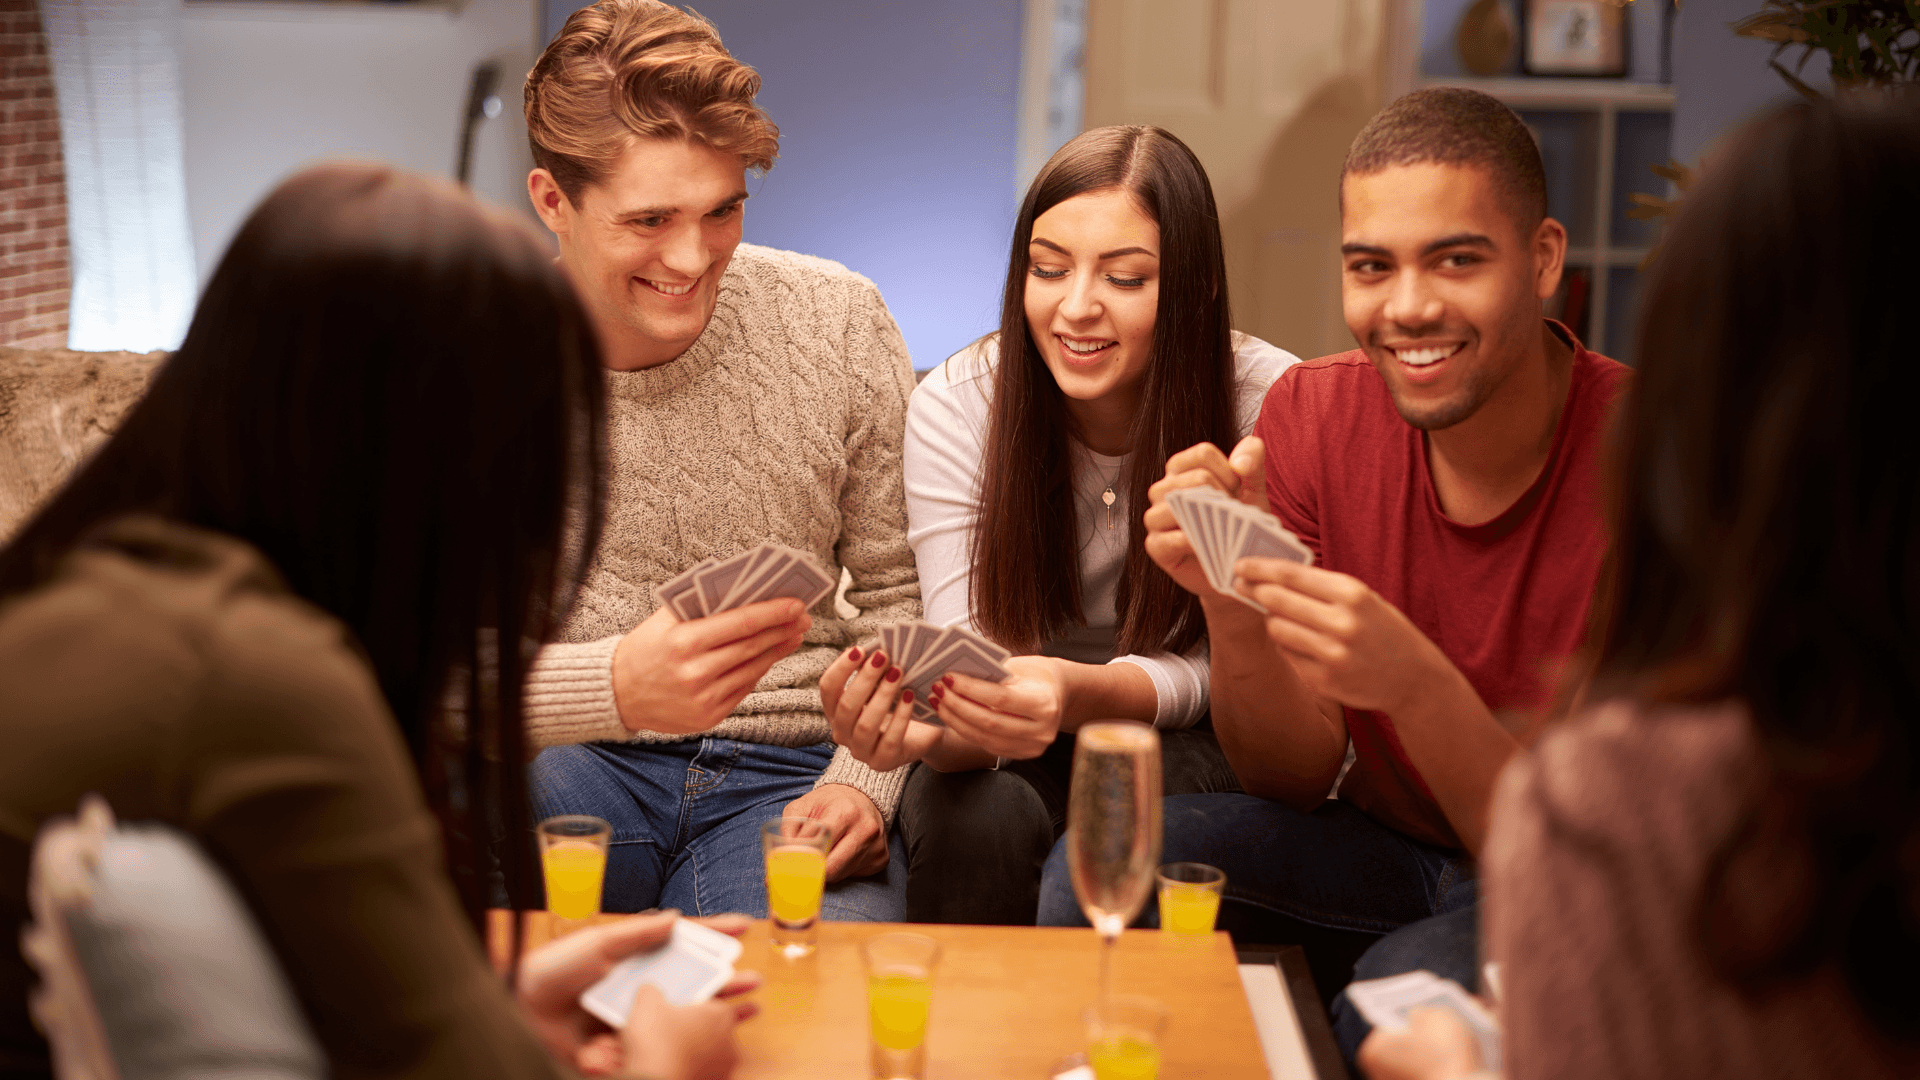 The Best Student Drinking Games